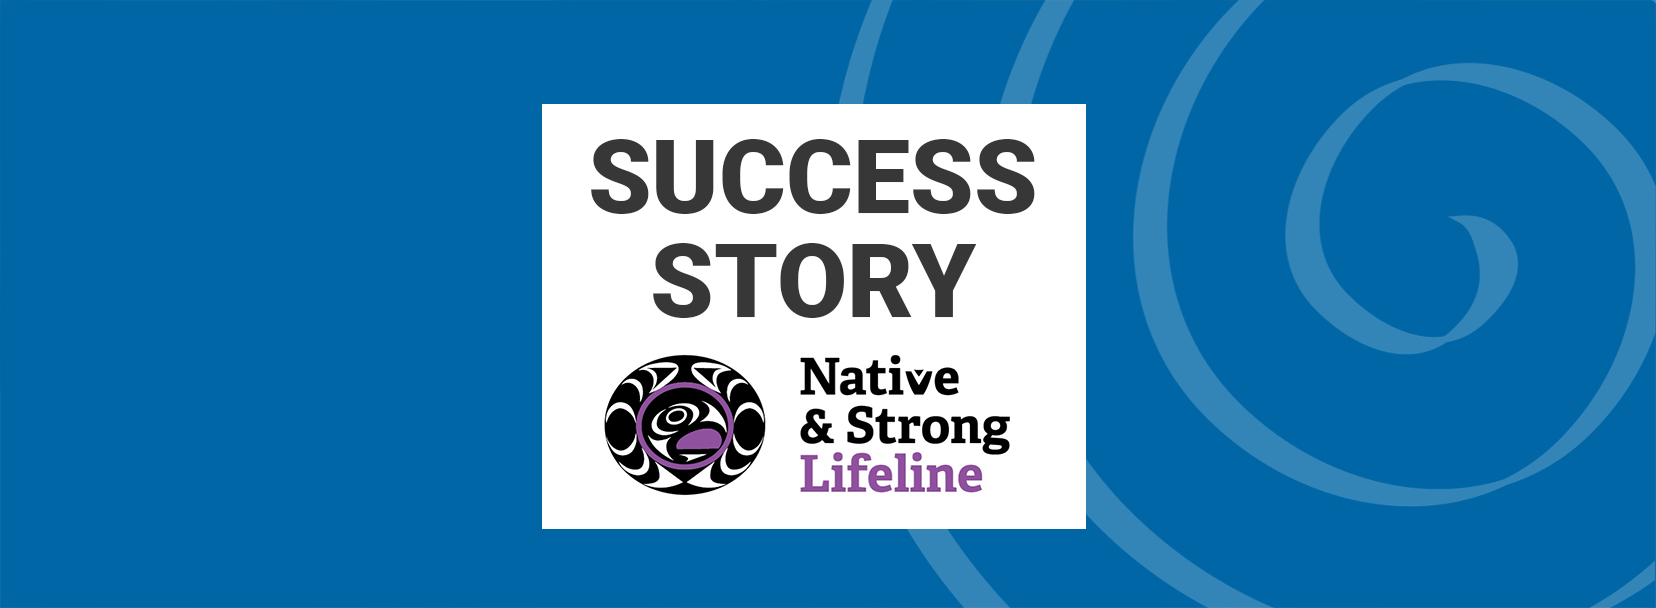 native-and-strong-lifeline